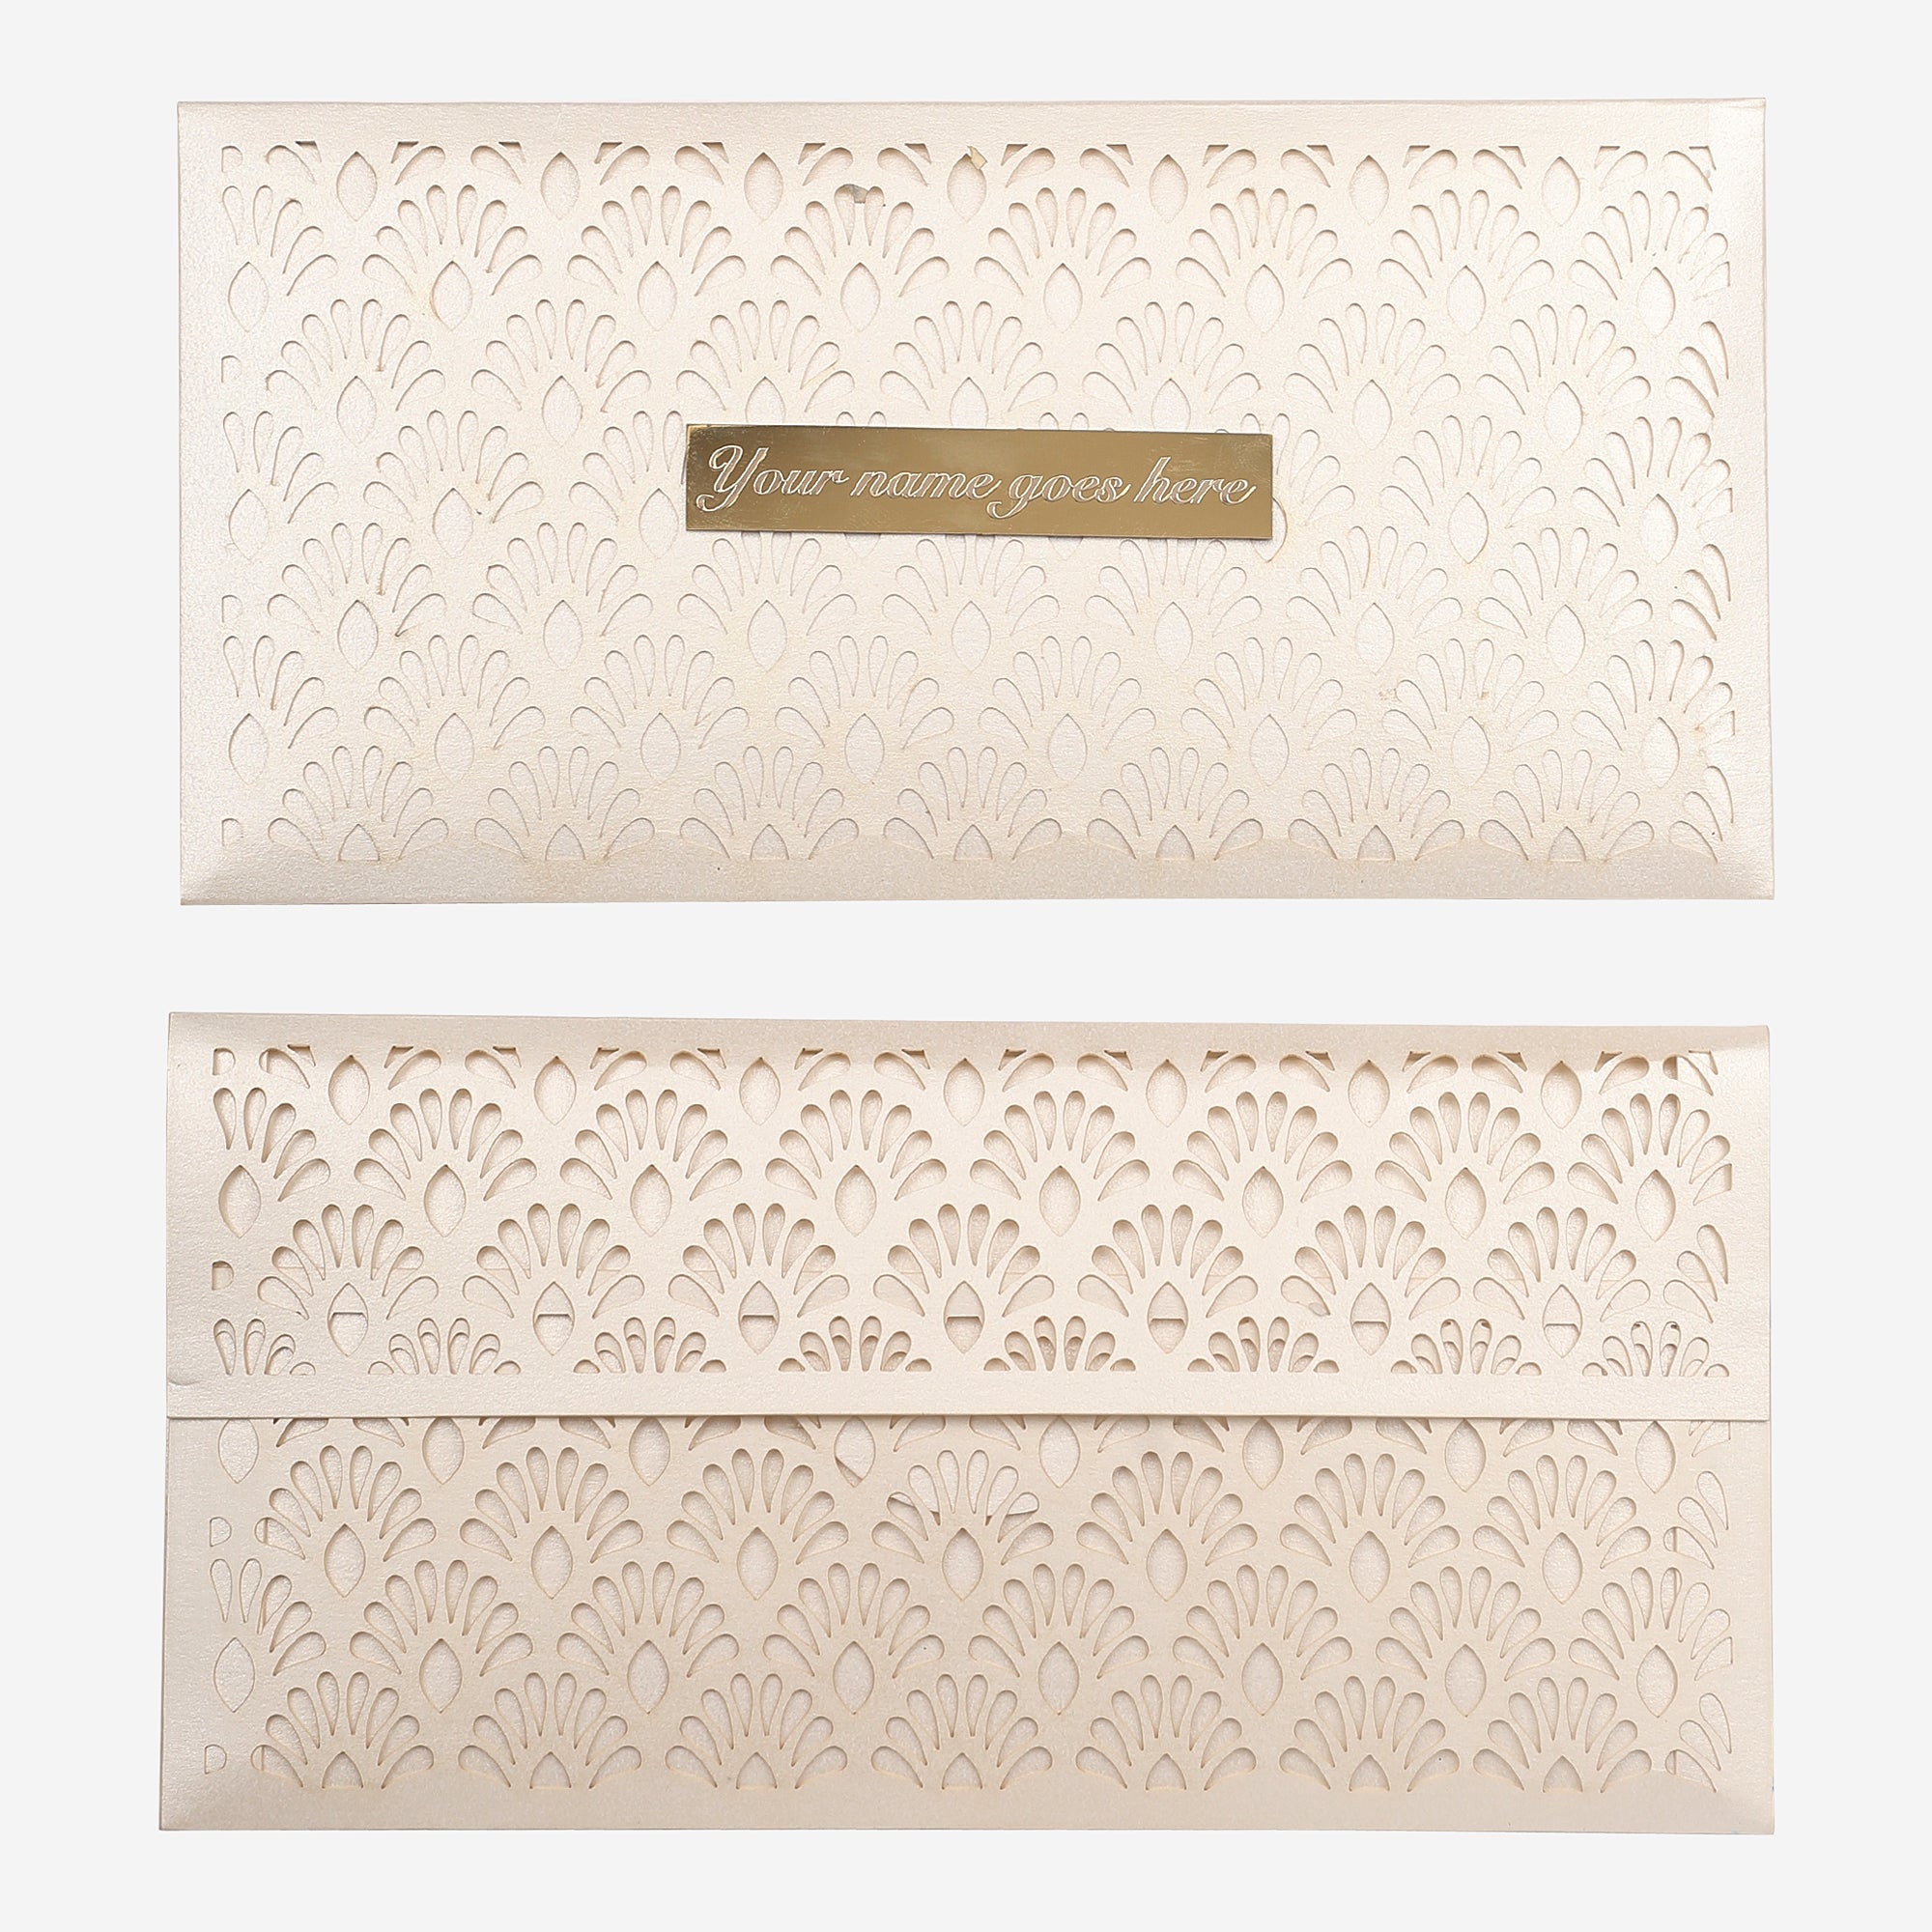 Pearl French Lace Cutwork Money Envelope